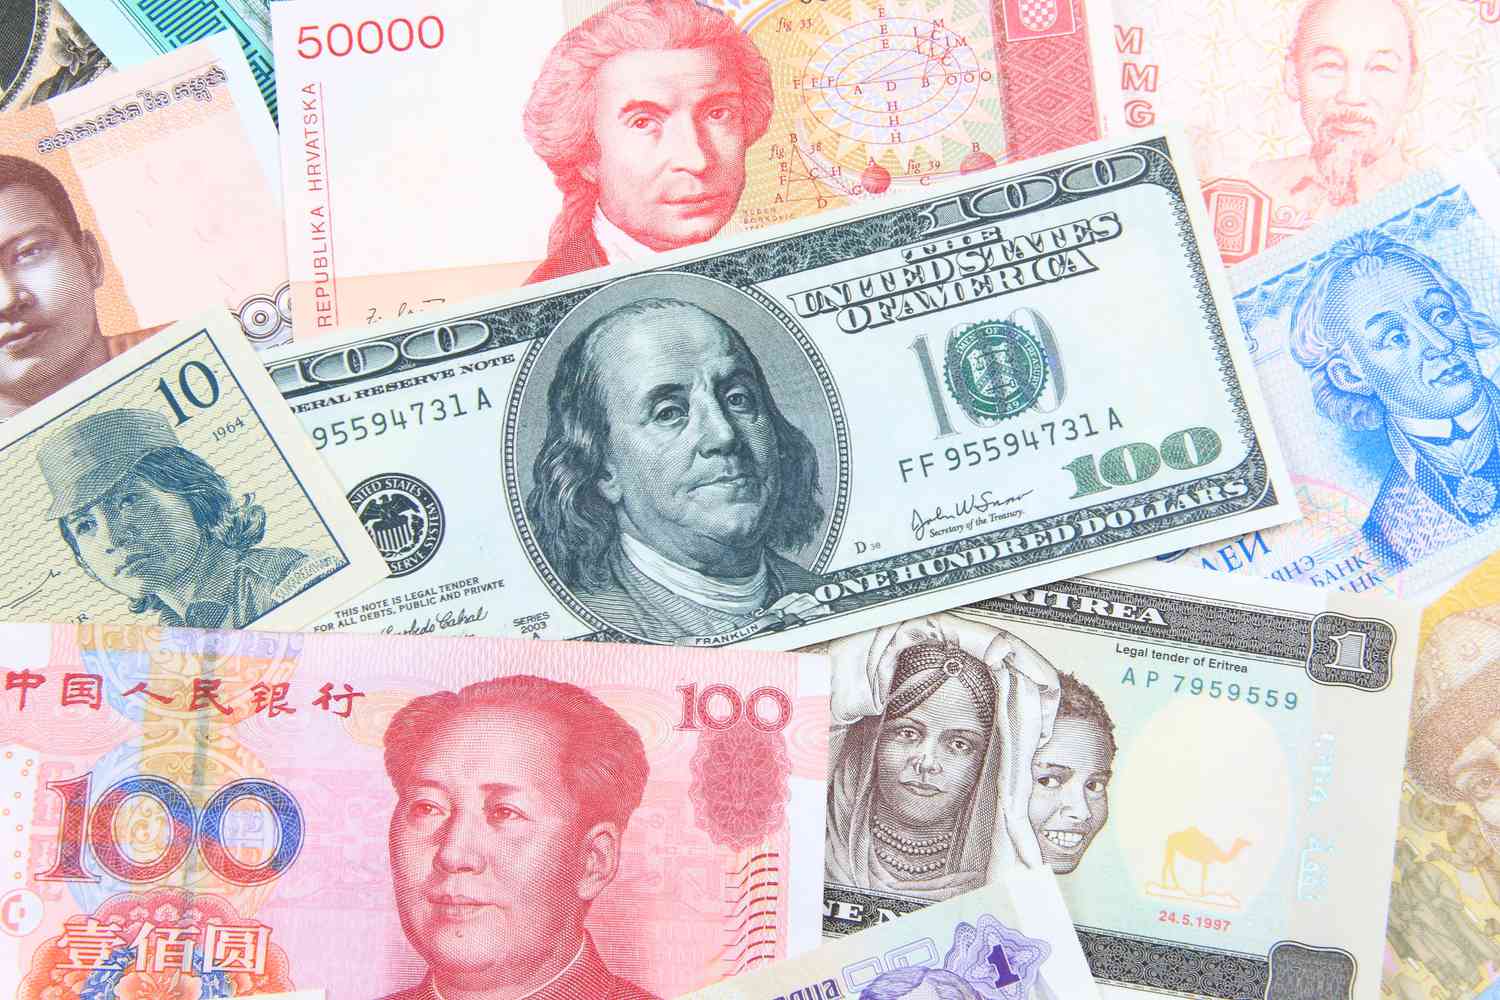 How the U.S. Dollar Became the World's Reserve Currency